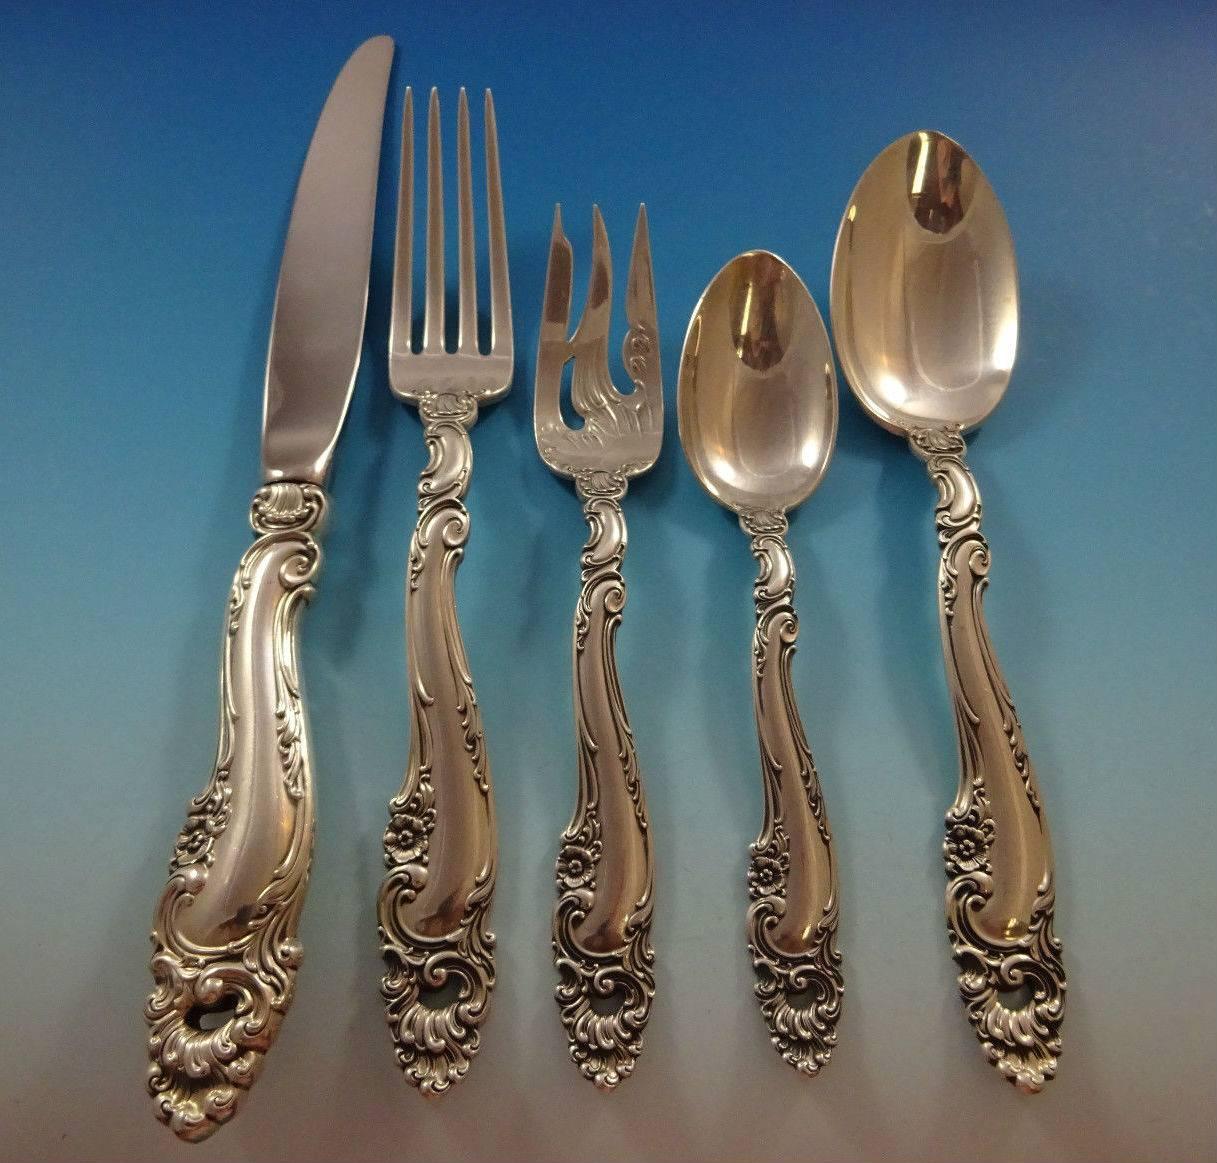 Decor by Gorham sterling silver flatware set - 141 pieces. This pattern is heavy and features rococo swirls, shells and small flowers. This set includes: 

12 dinner knives, 9 5/8